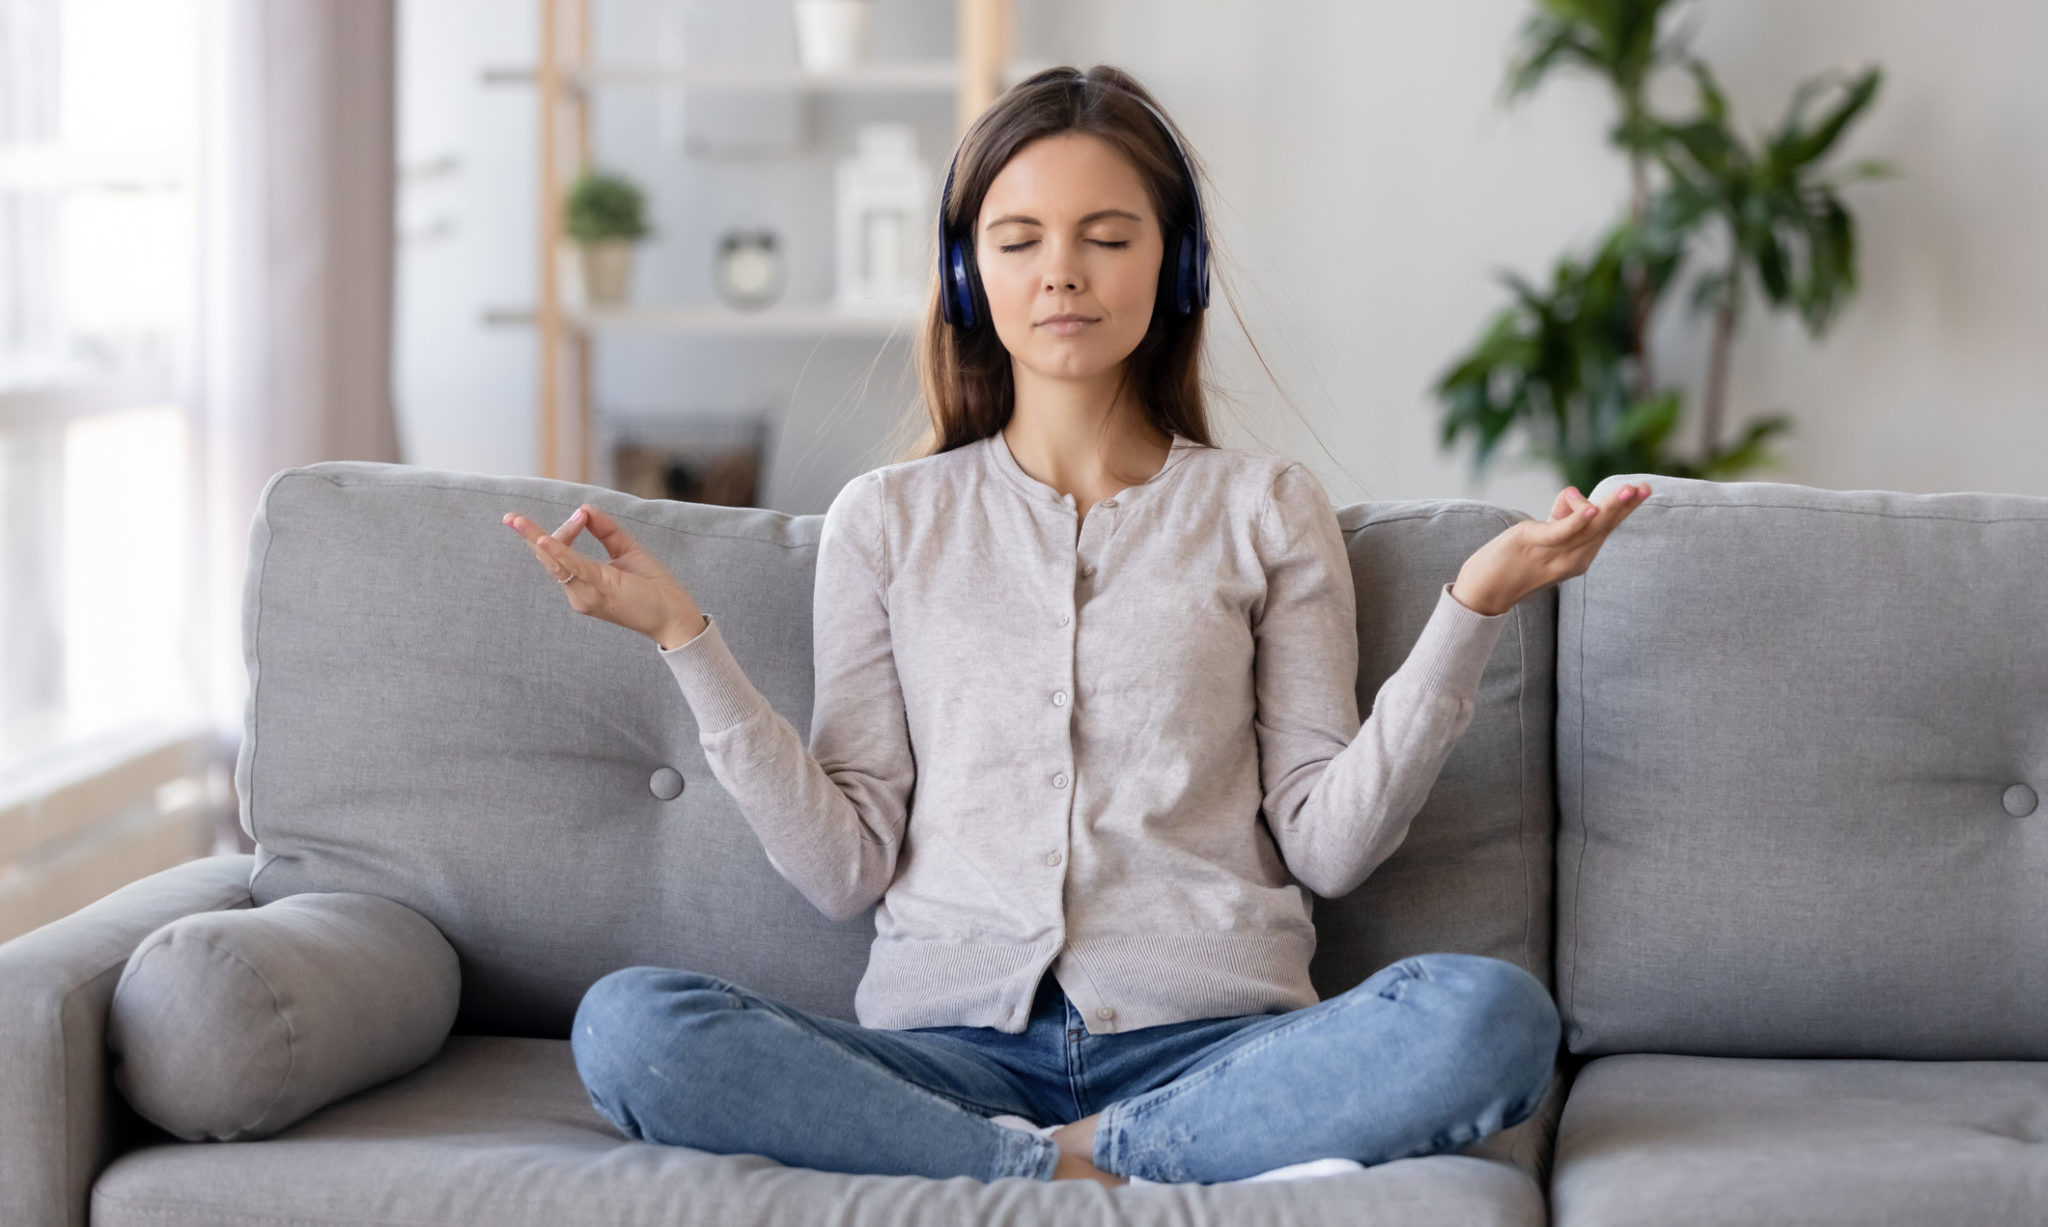 Calm young woman sit on couch meditate with mudra hands listen to slow music in headphones, peaceful relaxed girl female wearing earphones practice yoga on sofa enjoy rhythmic chillout tracks